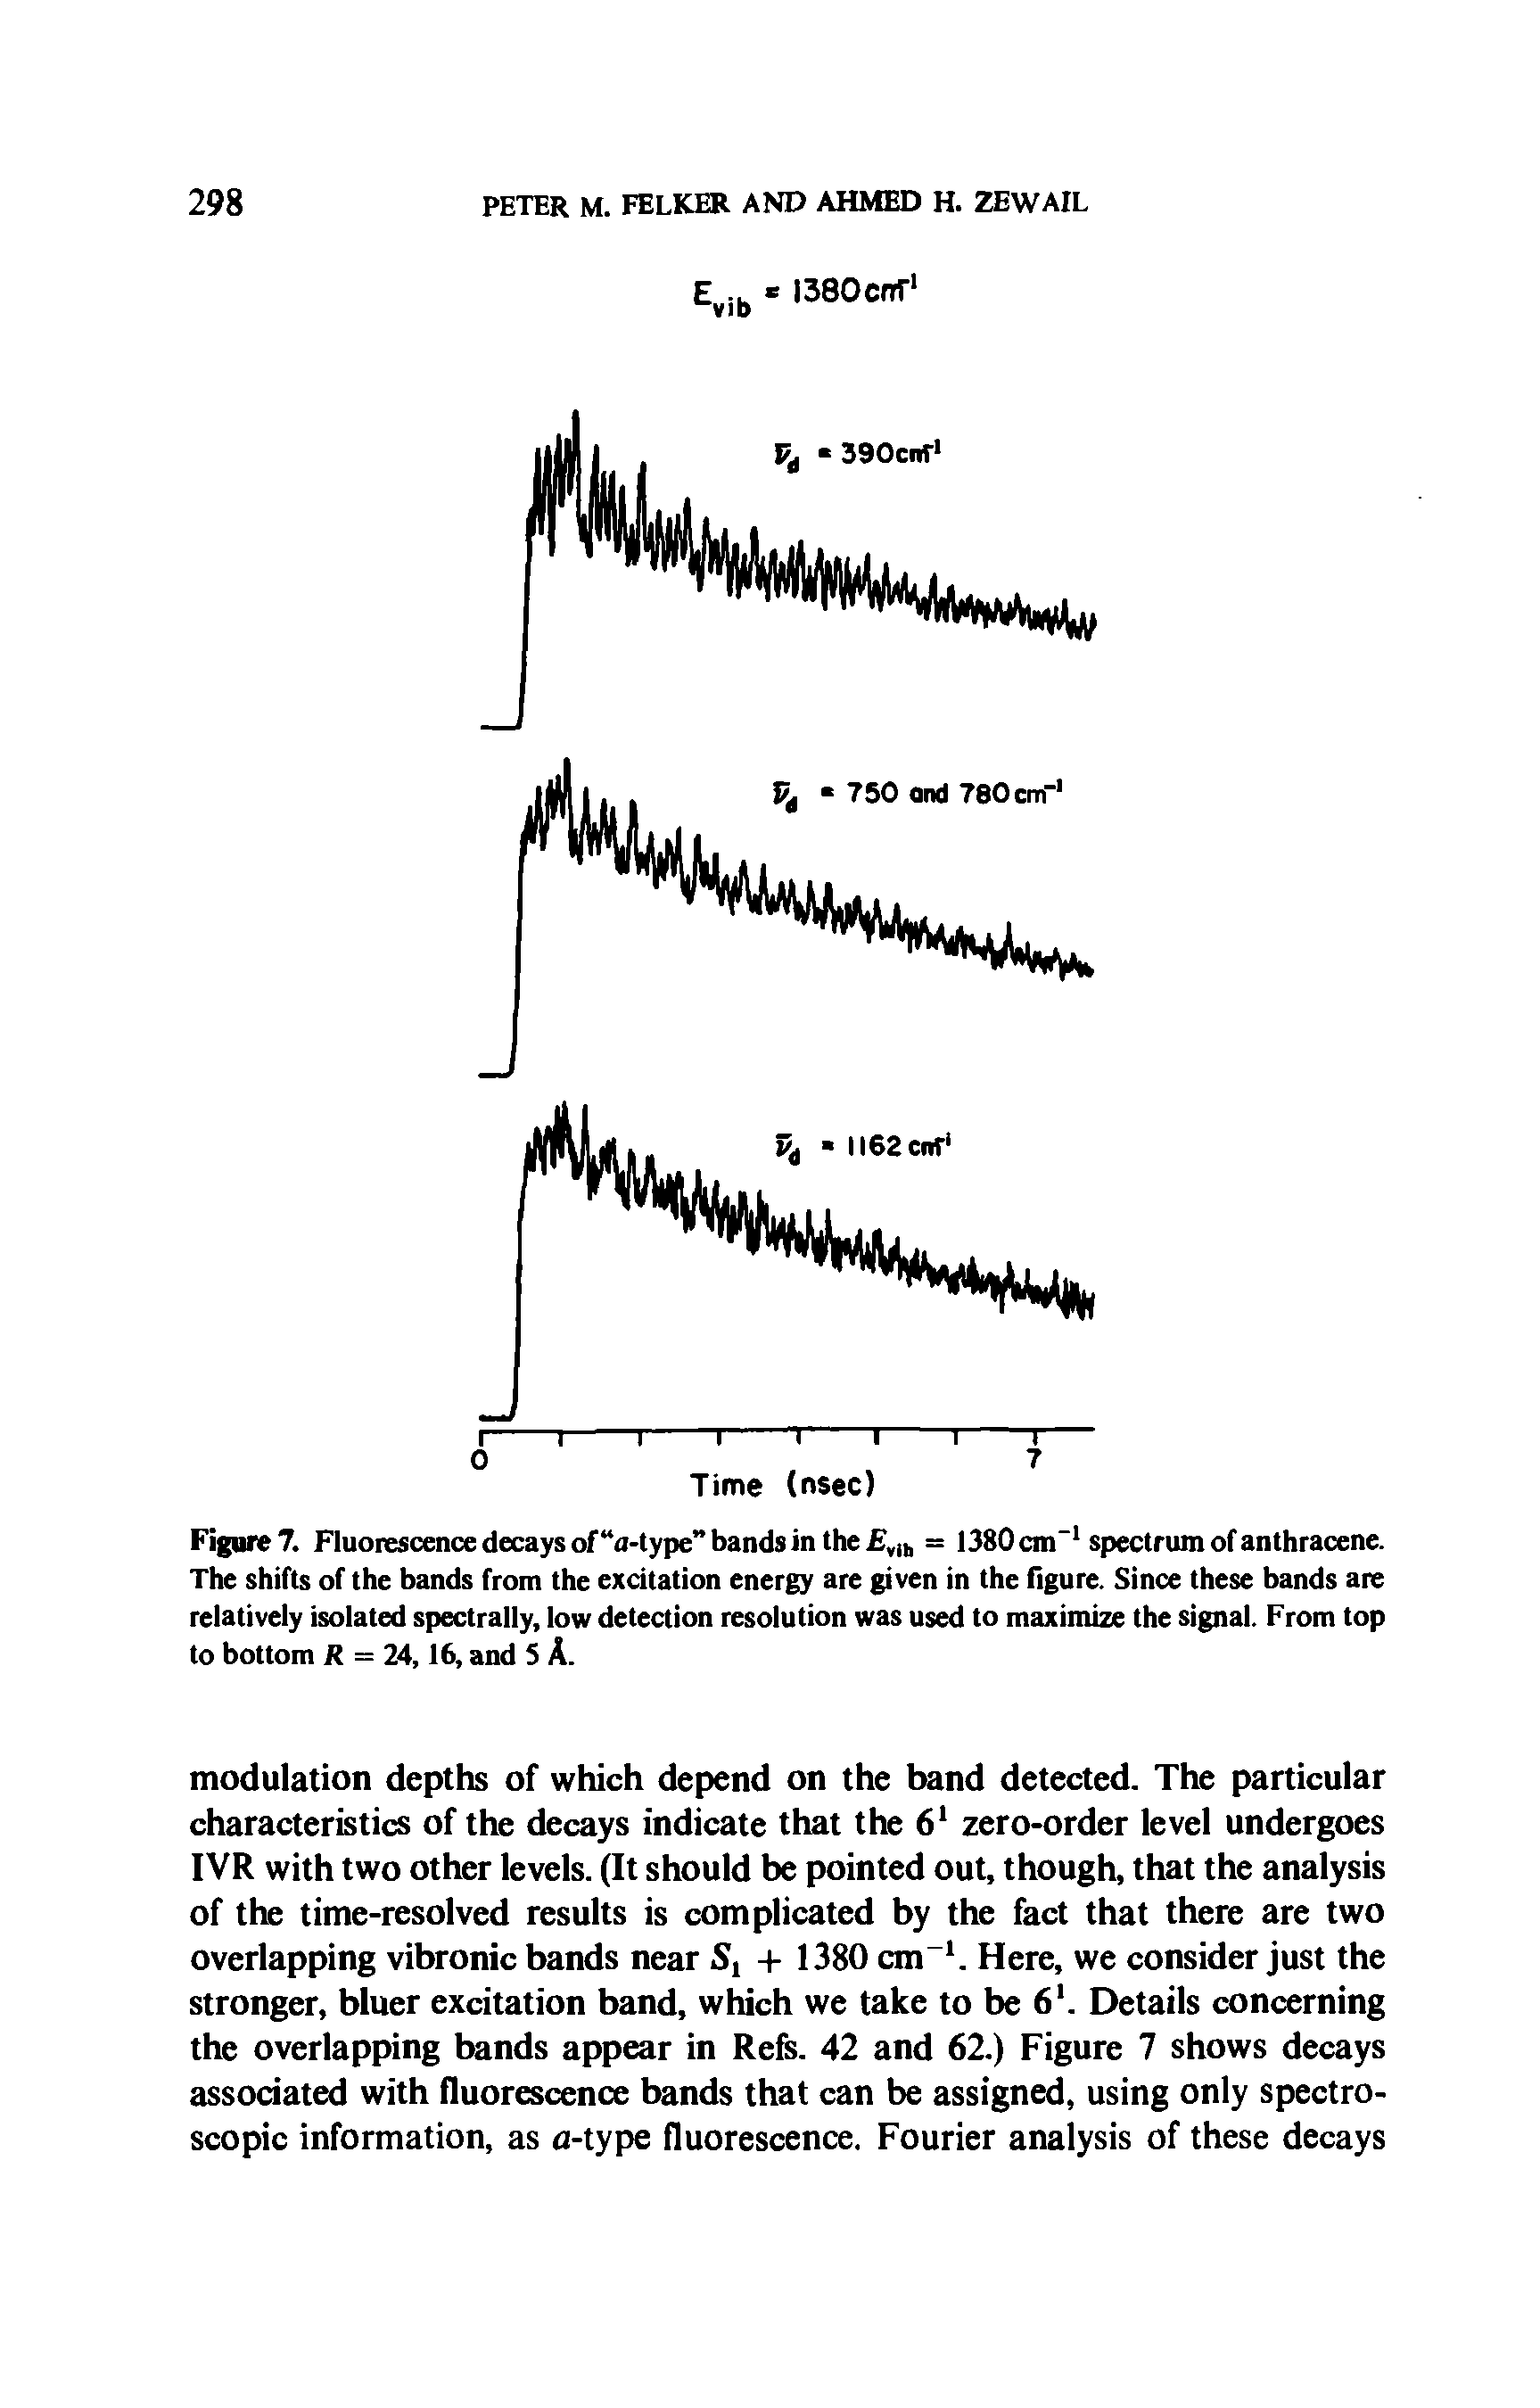 Figure 7. Fluorescence decays of a-type bands in the vlh = 1380 cm-1 spectrum of anthracene. The shifts of the bands from the excitation energy are given in the figure. Since these bands are relatively isolated spectrally, low detection resolution was used to maximize the signal. From top to bottom R = 24,16, and S A.